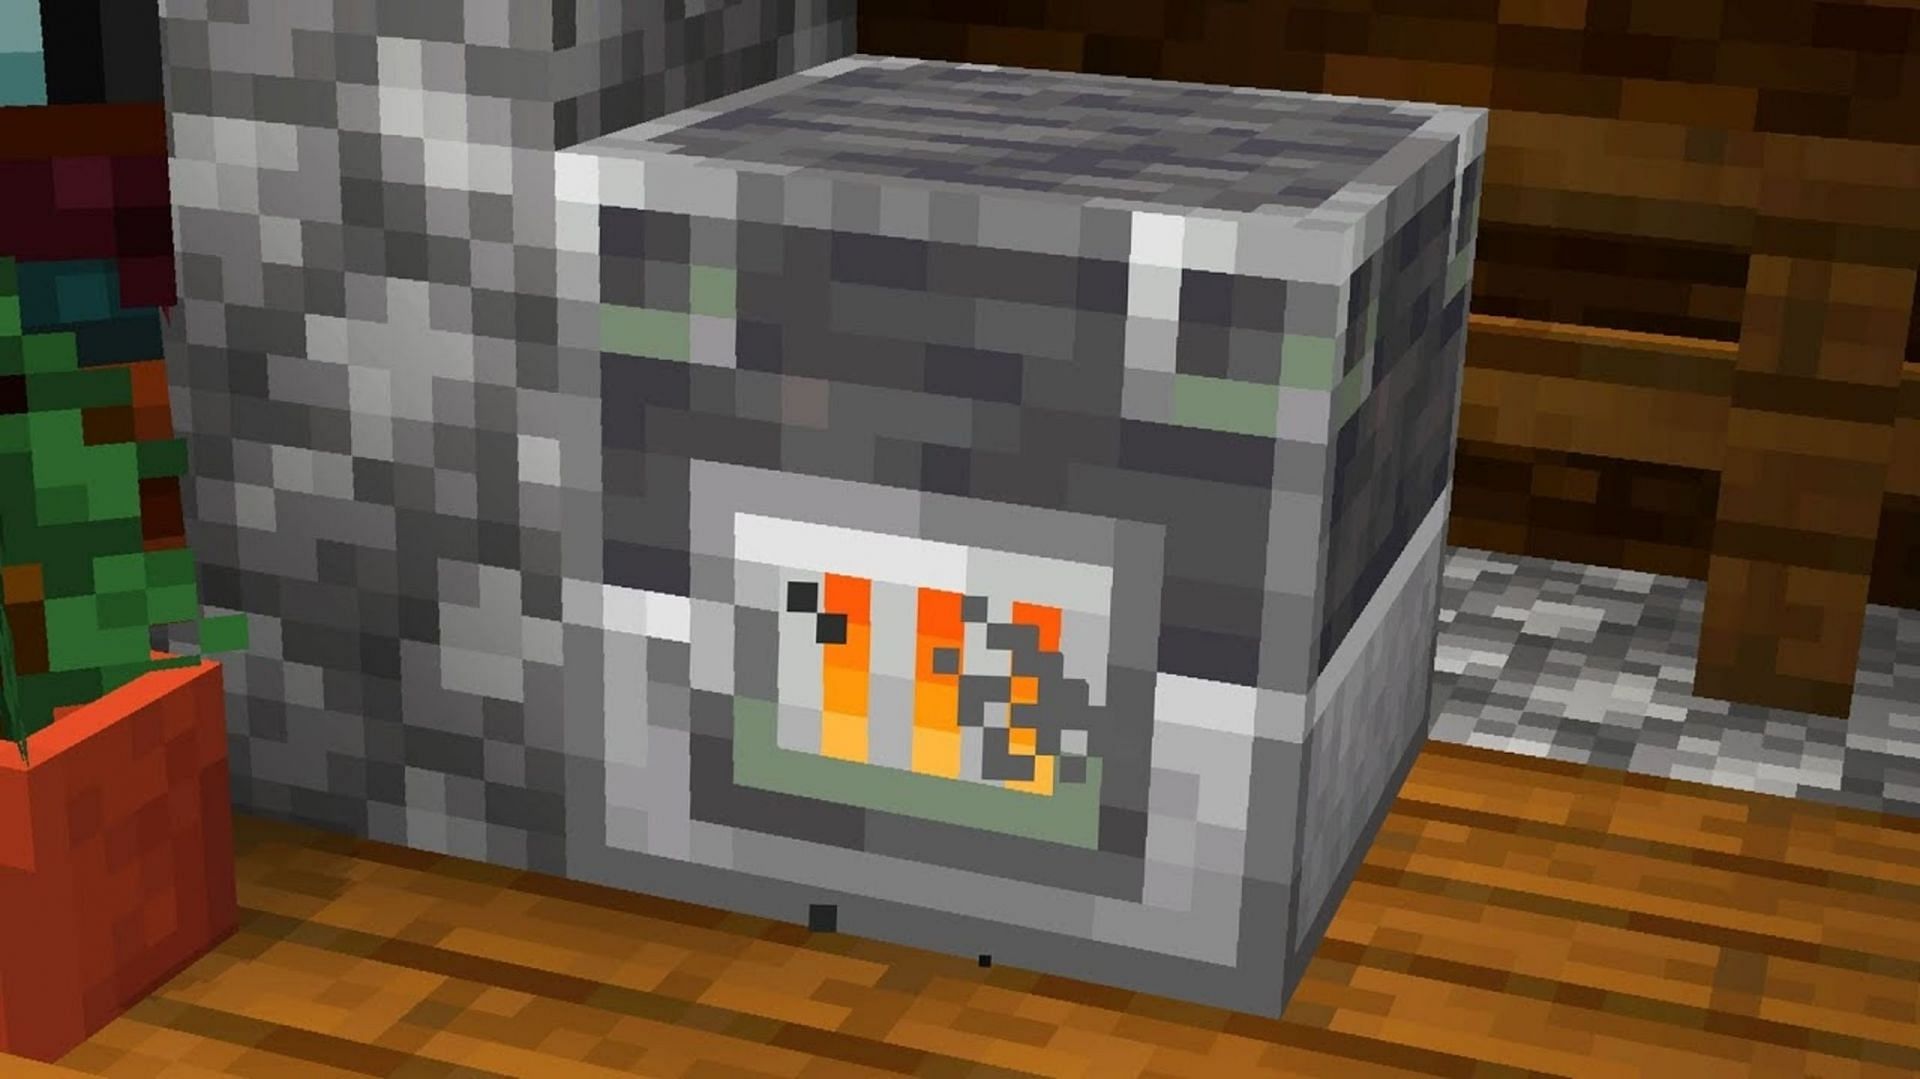 A blast furnace giving off its own light source (Image via YouTube/OMGCraft)